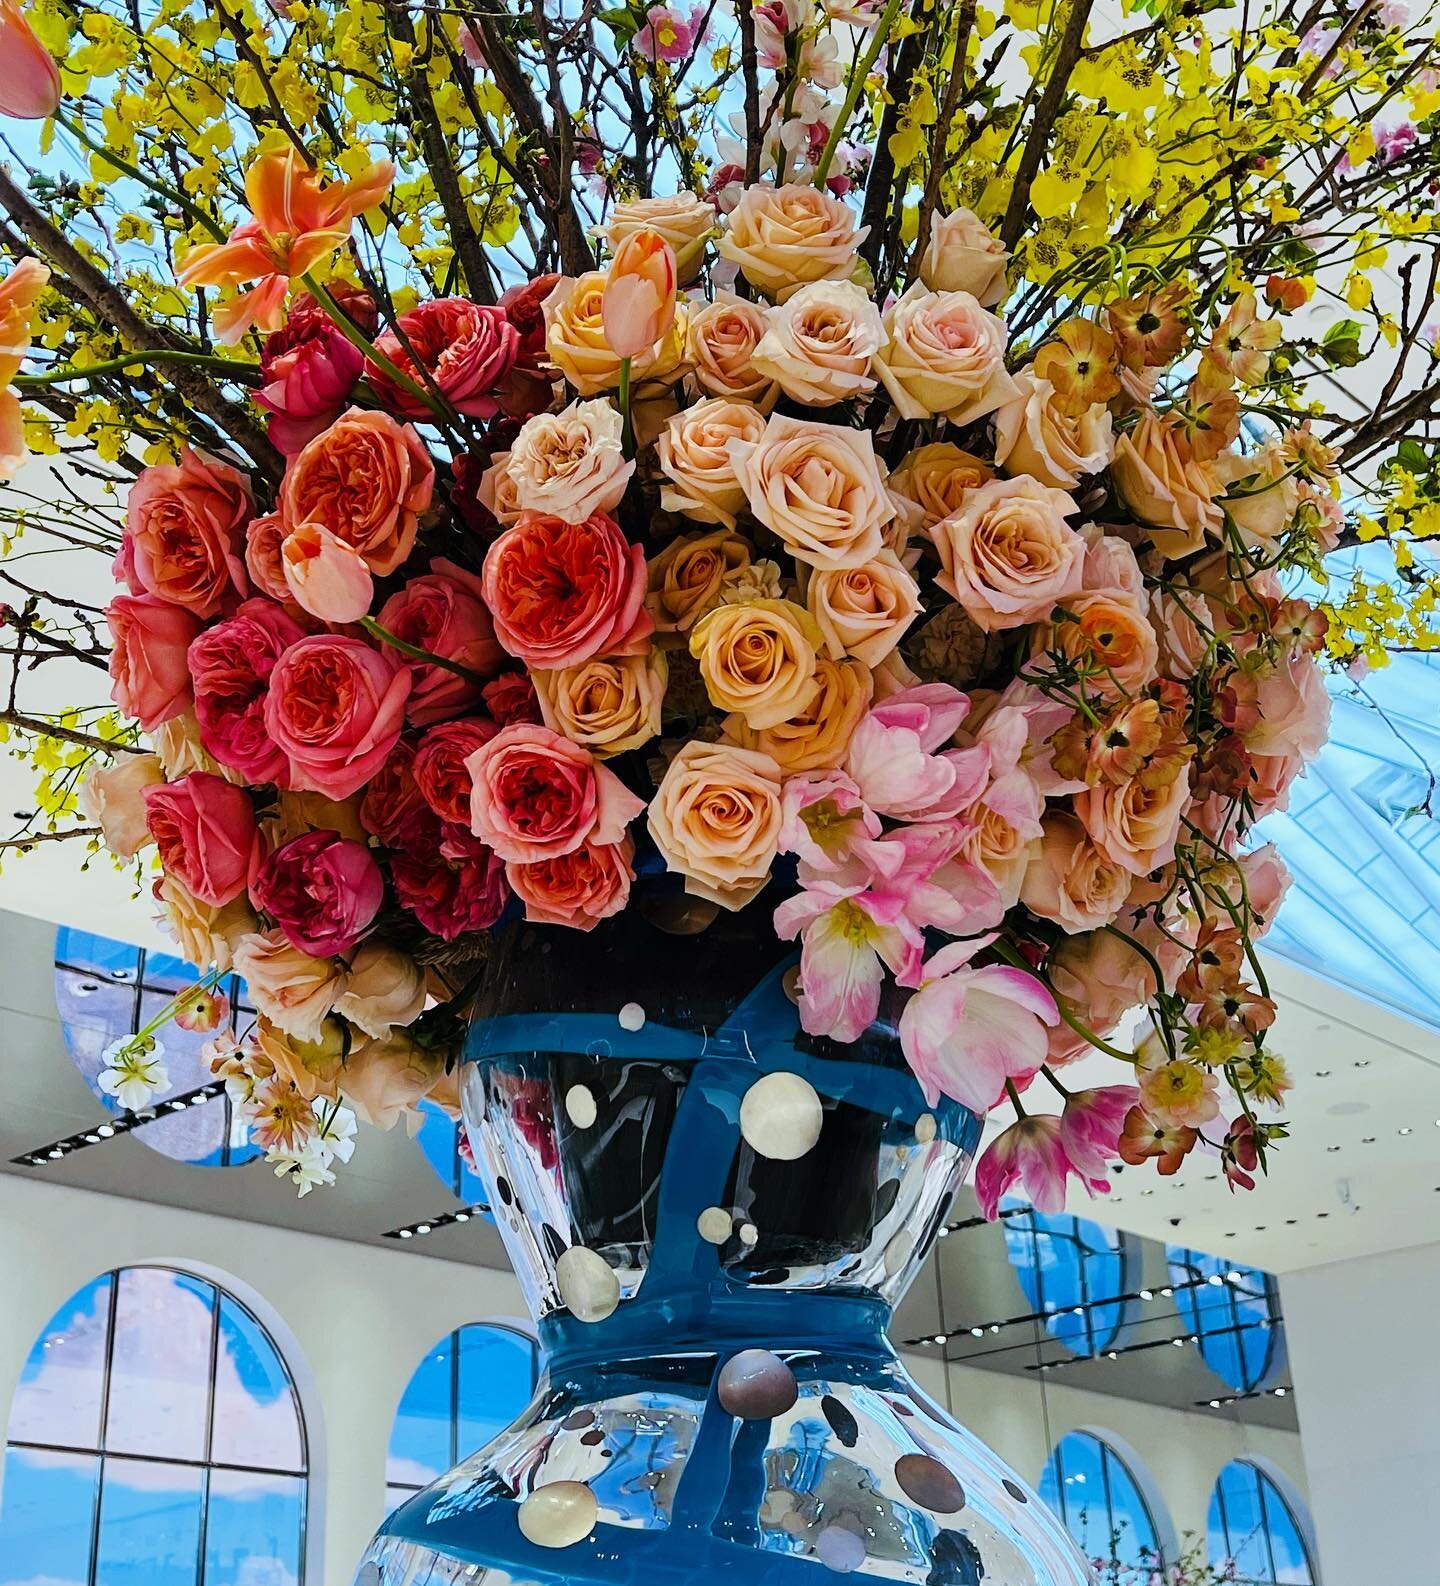 inspiration is everywhere&hellip;
#inspiration #flowers #arrangements #color #magnitude #makeanimpact #inspiredbydesign #beauty #ideas #concepts #design #inspired @tiffanyandco #bethanynewellbrand #stylearchitect #naillacquer #shadesonthehorizon